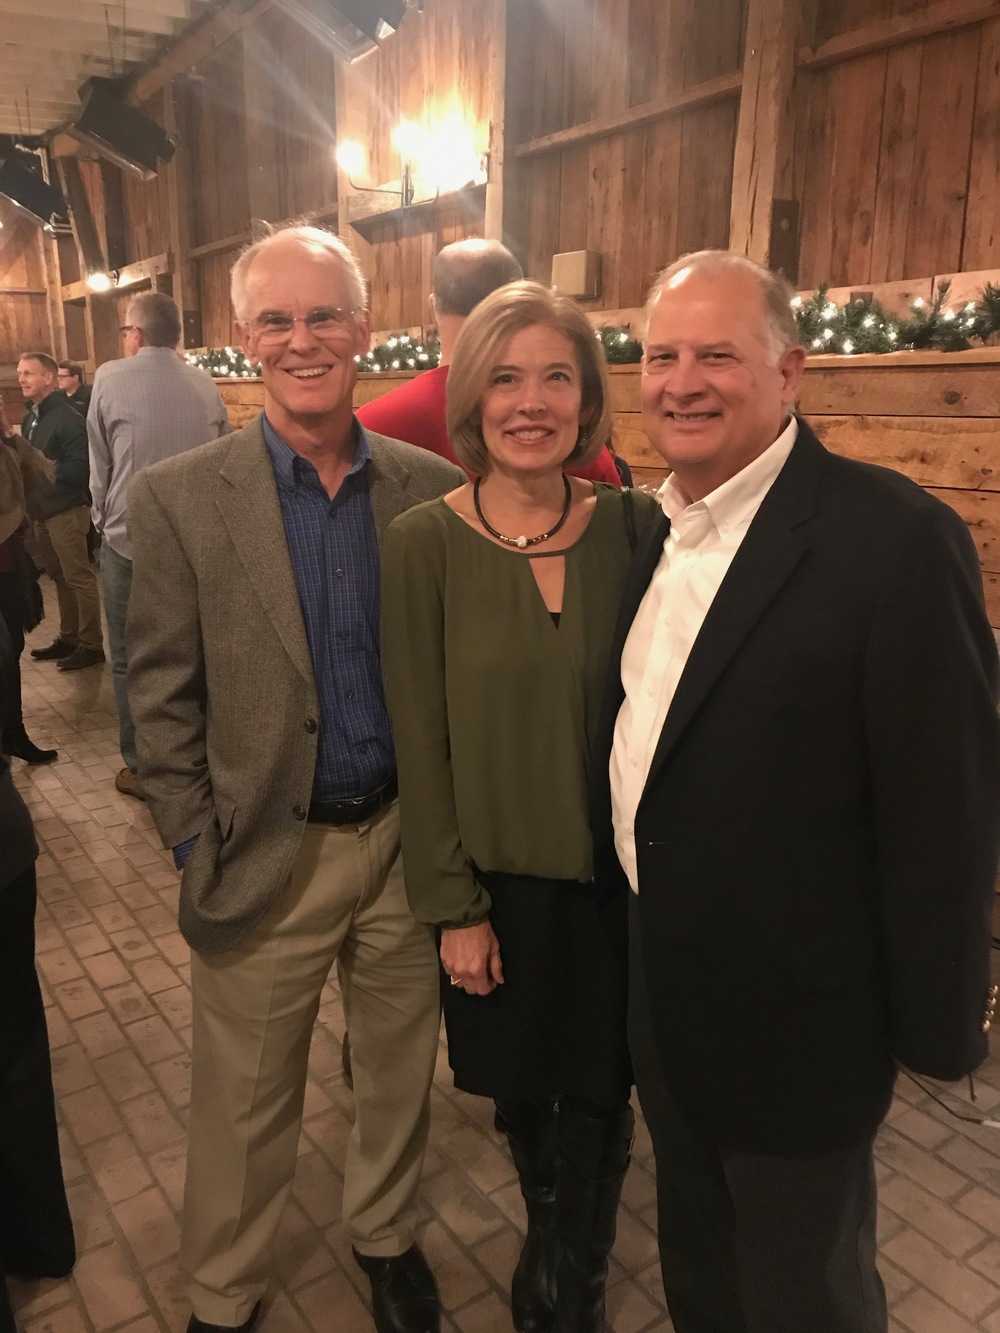 Bob Hawins, Peggy and John Scott of Priority Payments East